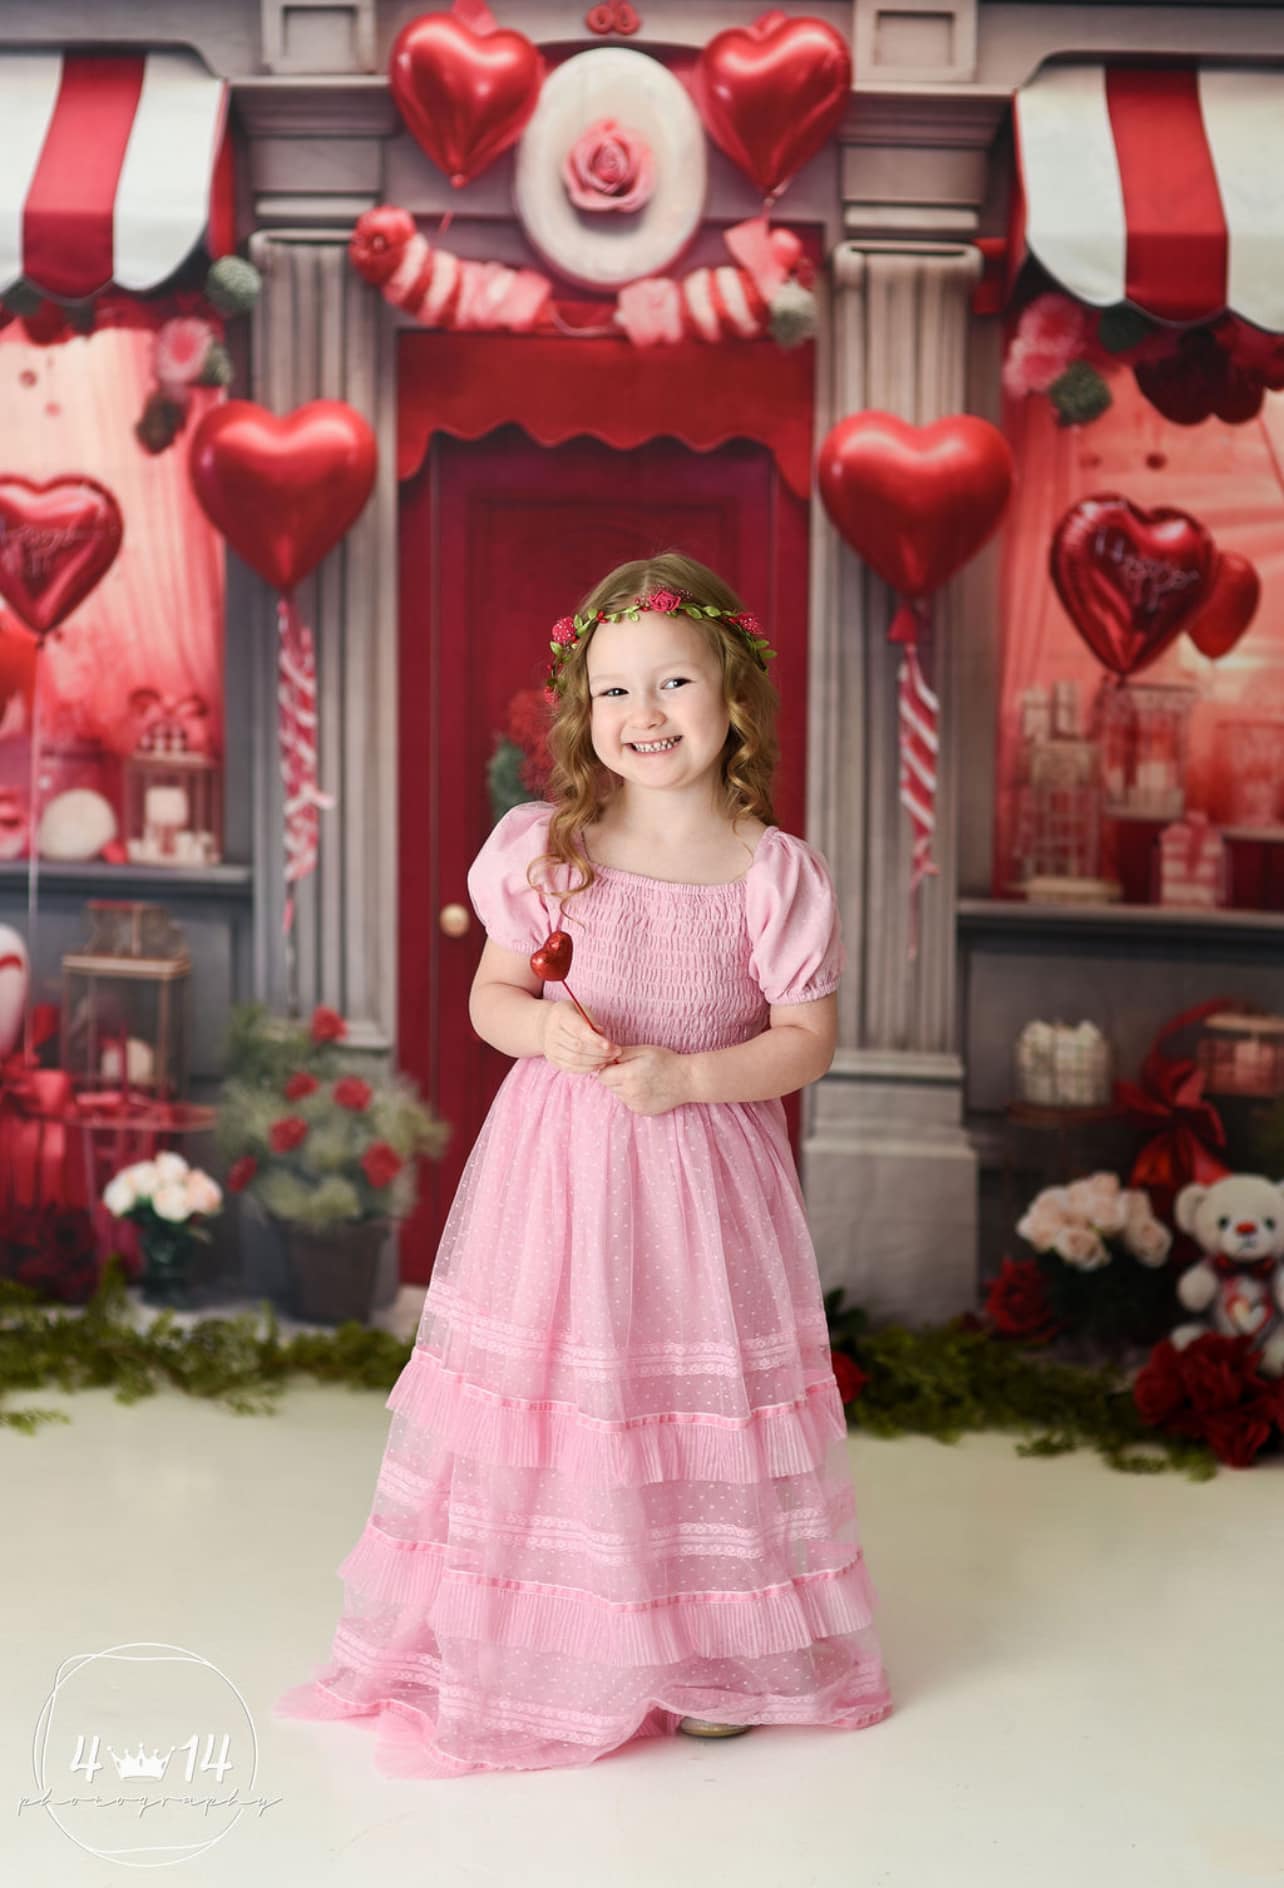 Kate Valentine's Day Pink Love Heart Balloon Room Backdrop Designed by  Emetselch, valentines day